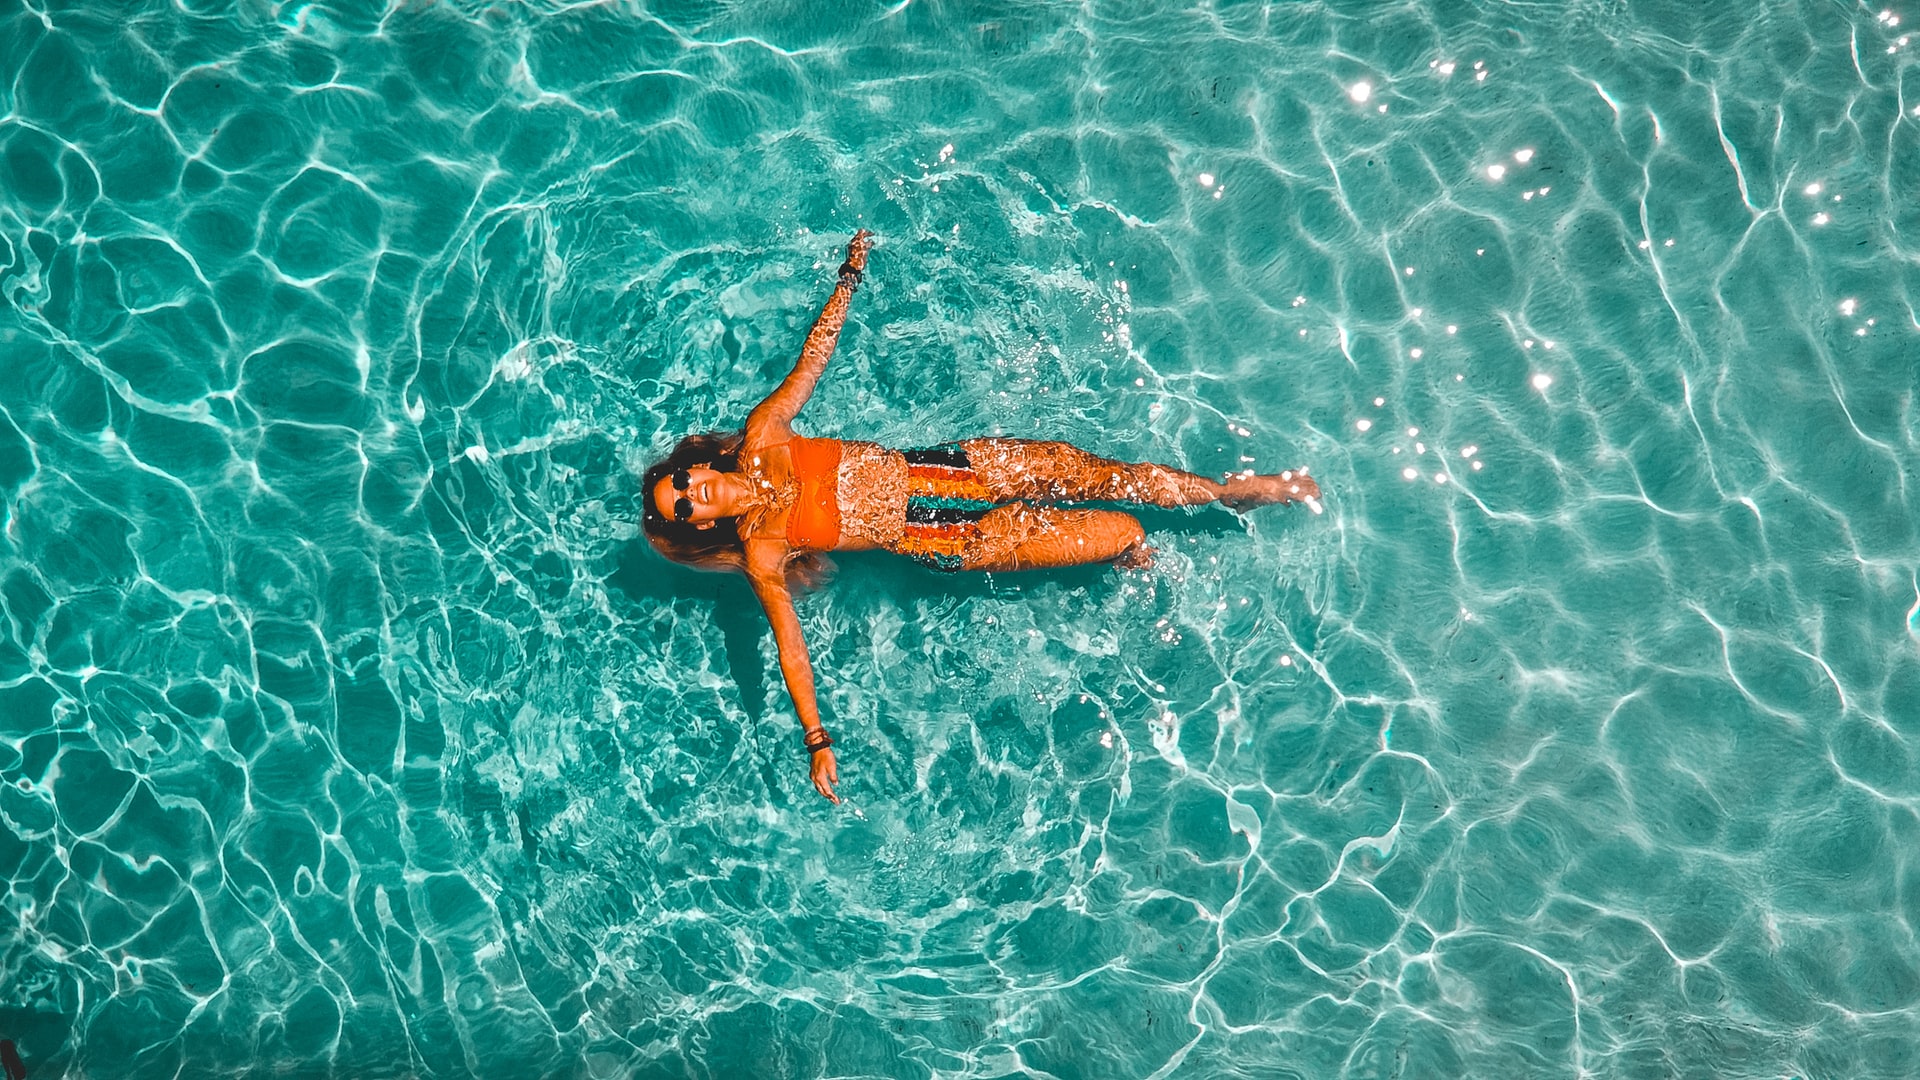 Blys blog - Seven New Ways To Have The Best Staycation Ever And Three Reasons Why It Might Just Change Your Life - aerial photo of woman floating in pool